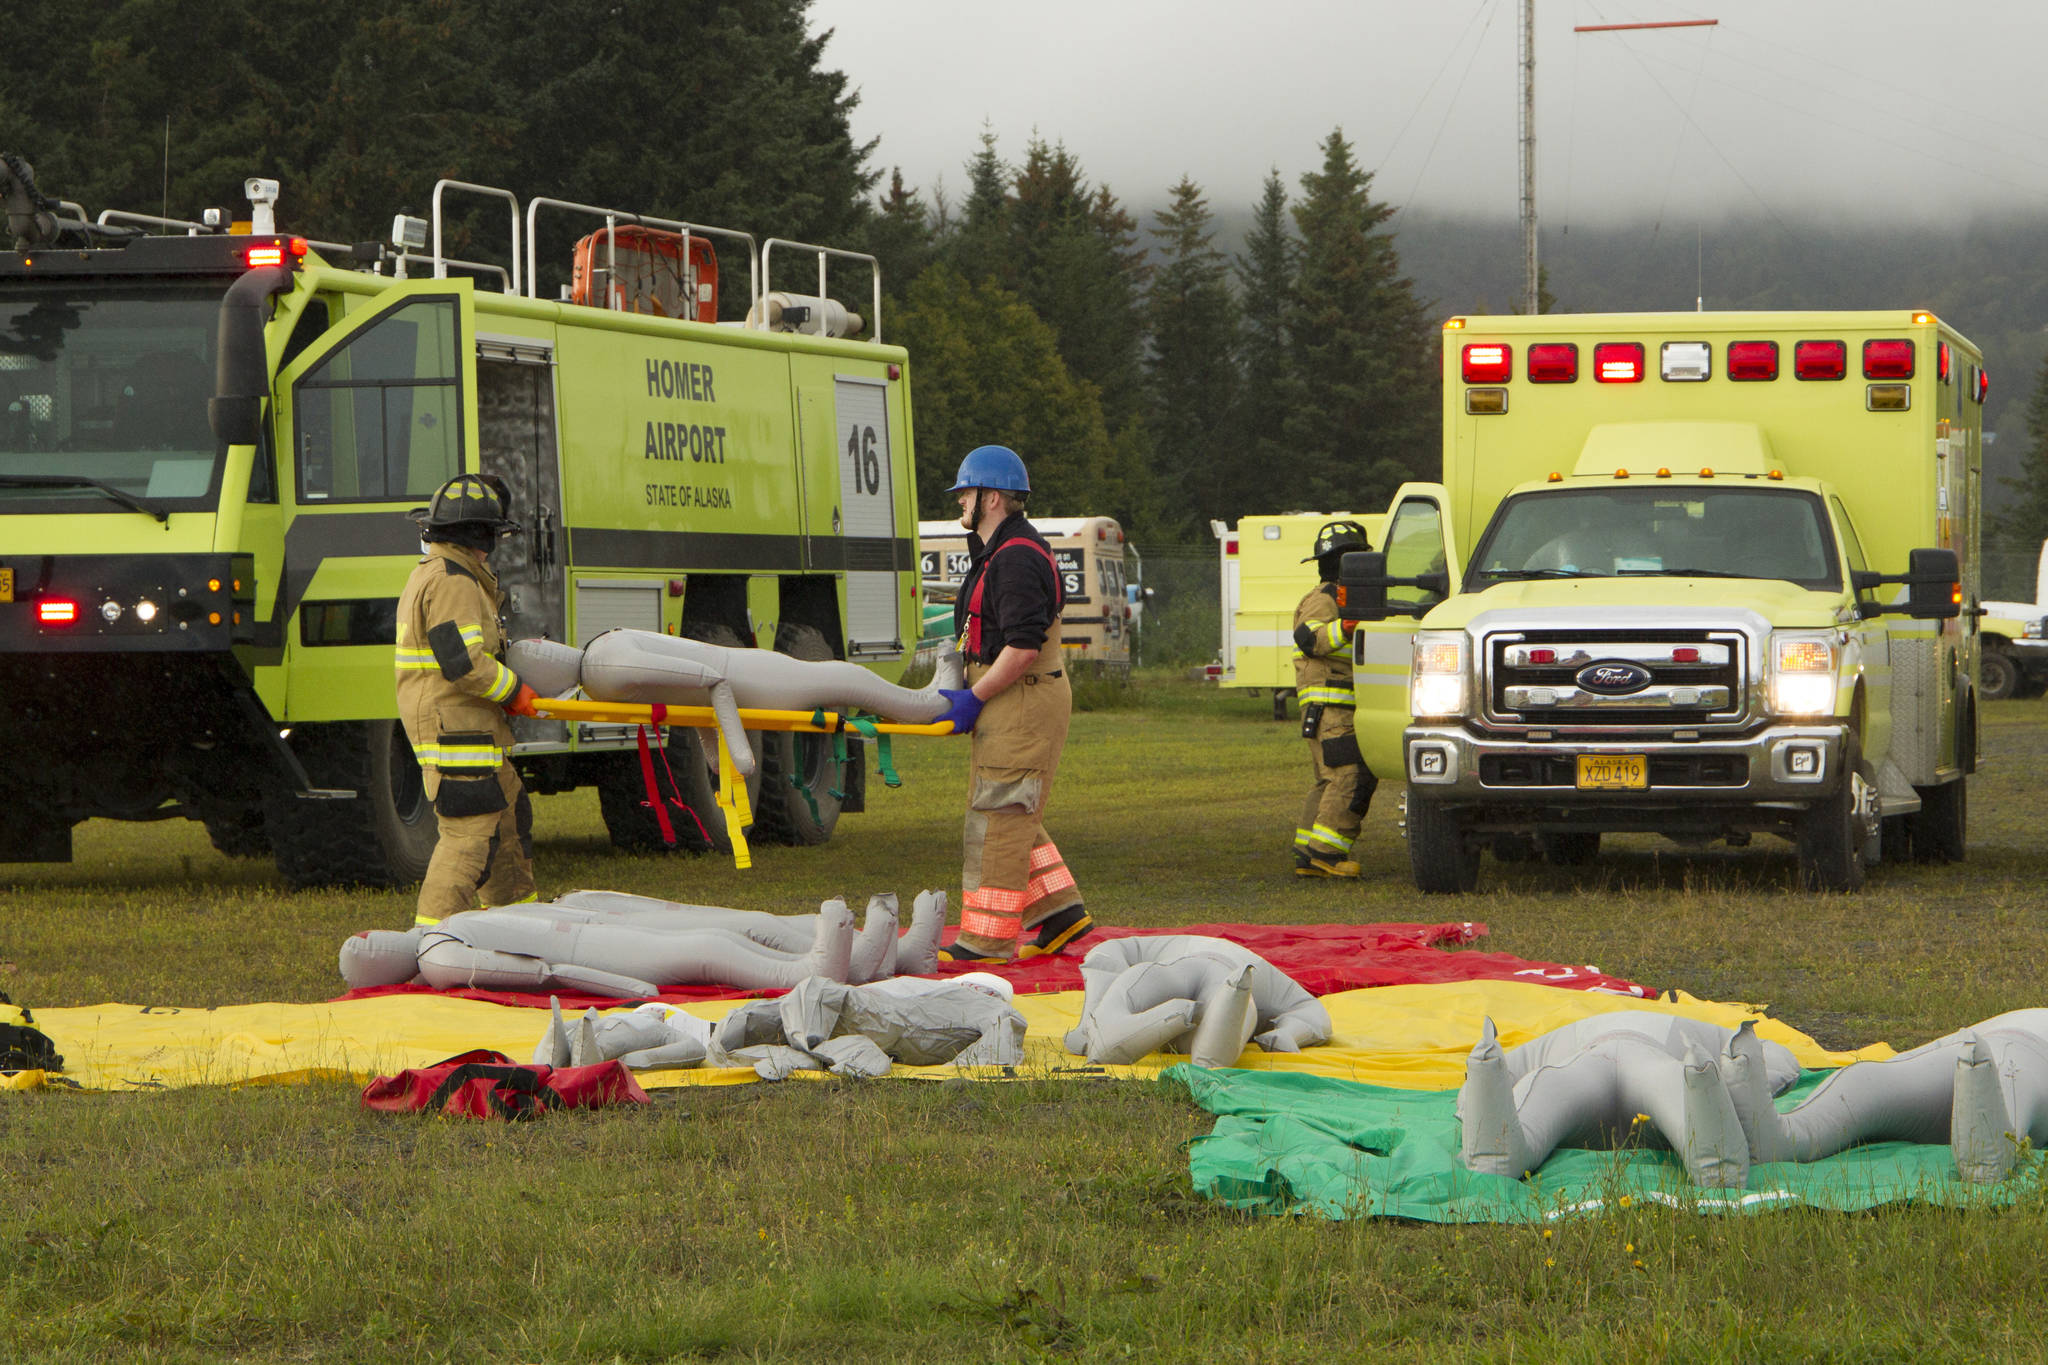 Emergency responders participate in a mass casualty emergency drill at Homer Airport on Tuesday, Aug. 24. The responders were responsible for recovering victims from a mock plane crash, triaging and transporting them to medical facilities. (Photo by Sarah Knapp/Homer News)